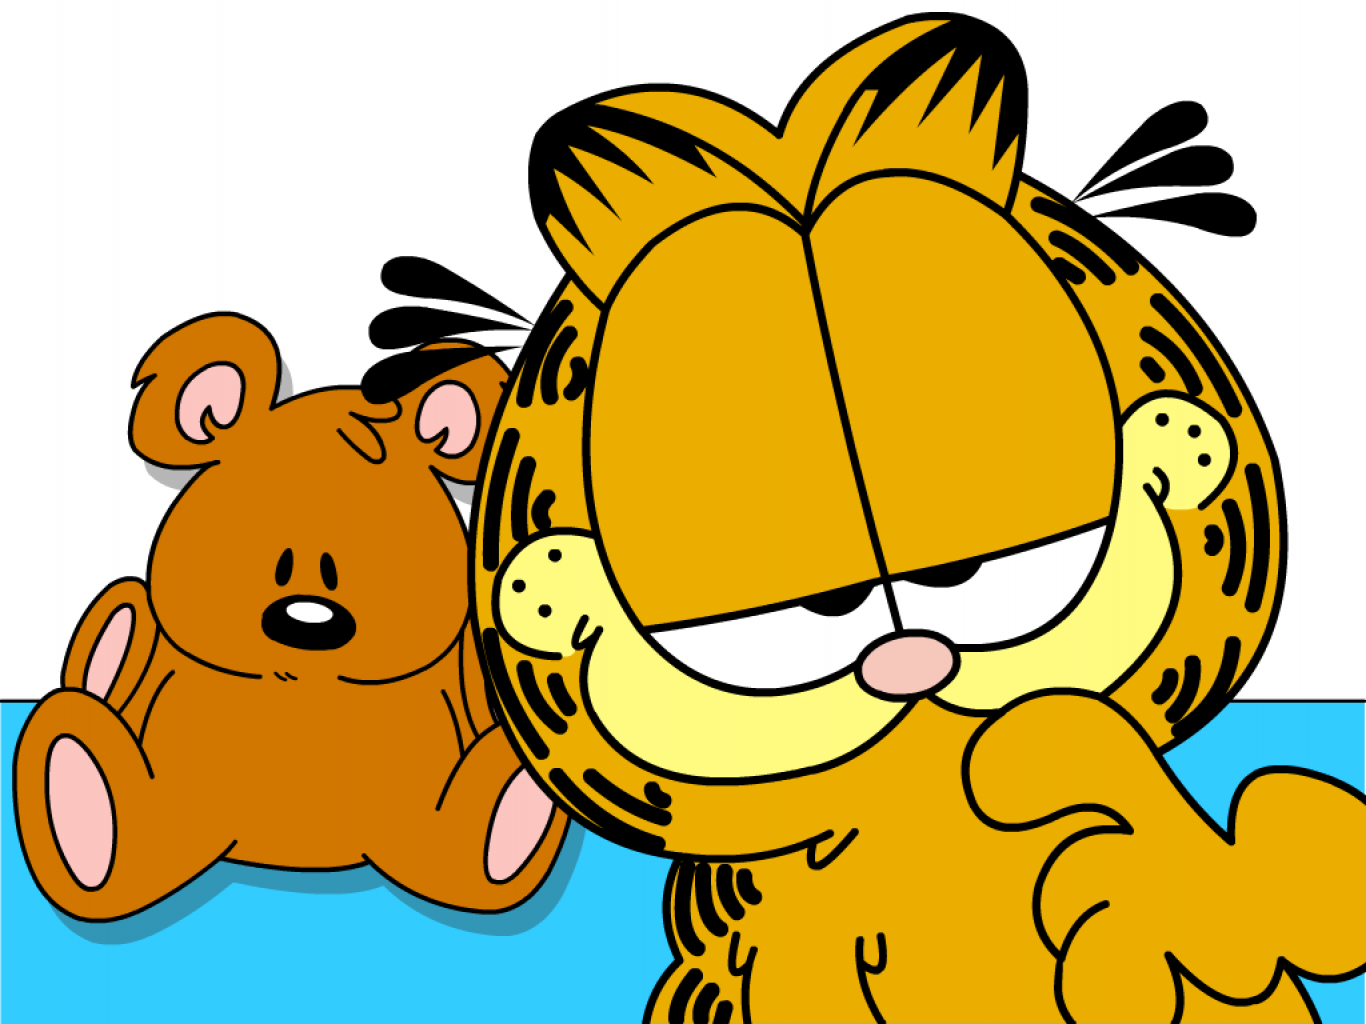 Wallpaper free download Garfield the cat with his teddy bearChild